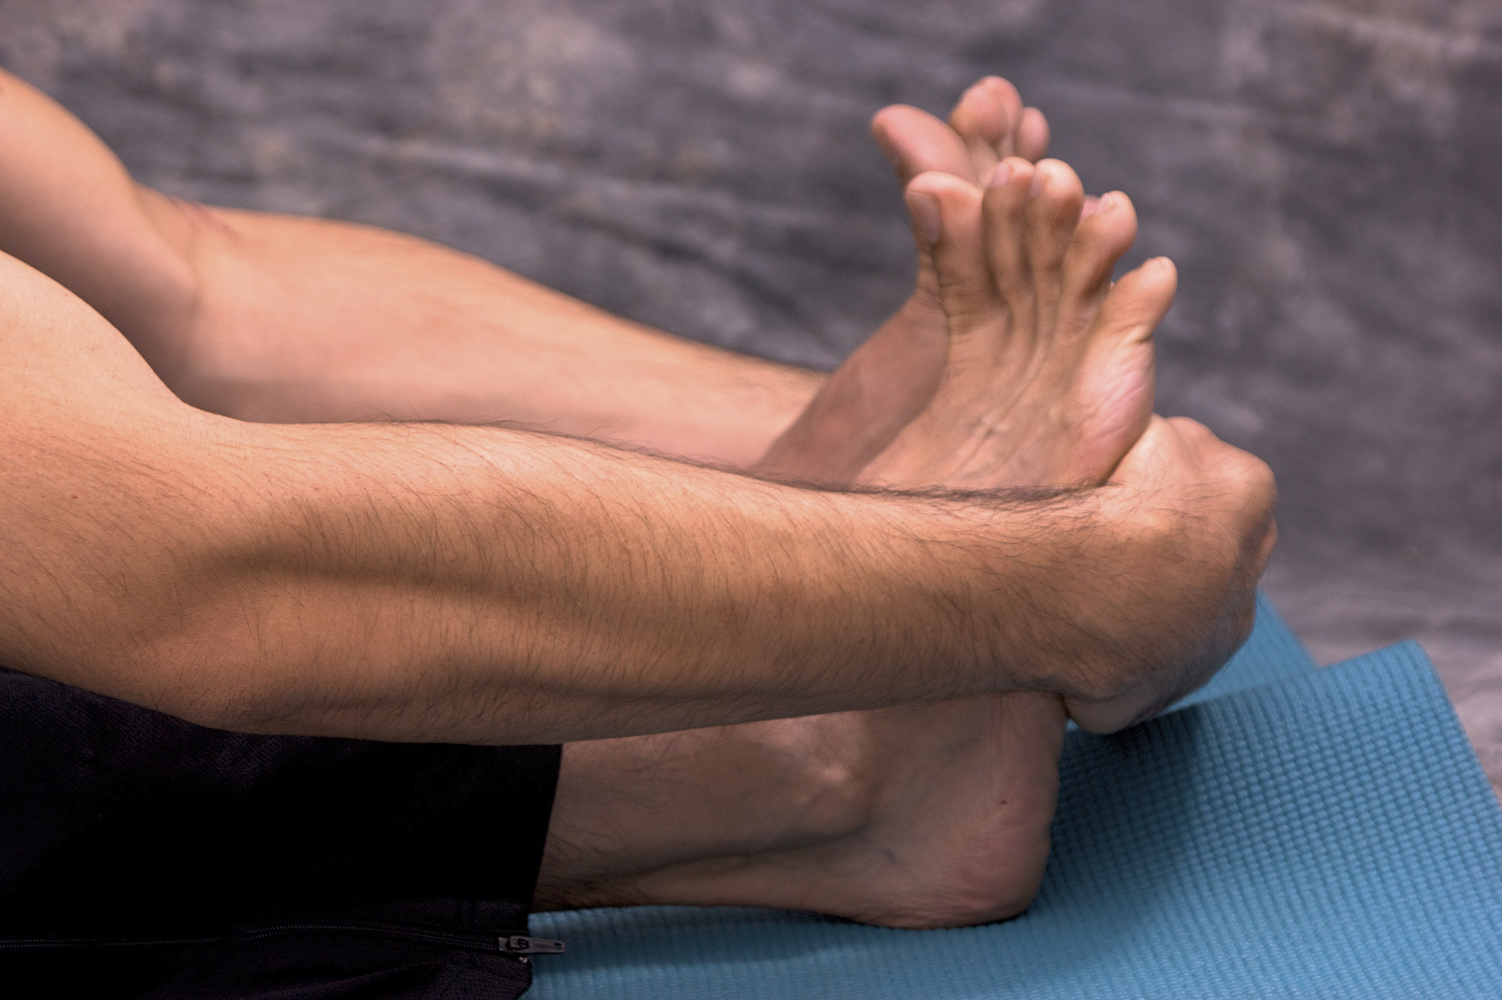 How to recover from leg and foot pain? Are there any yoga